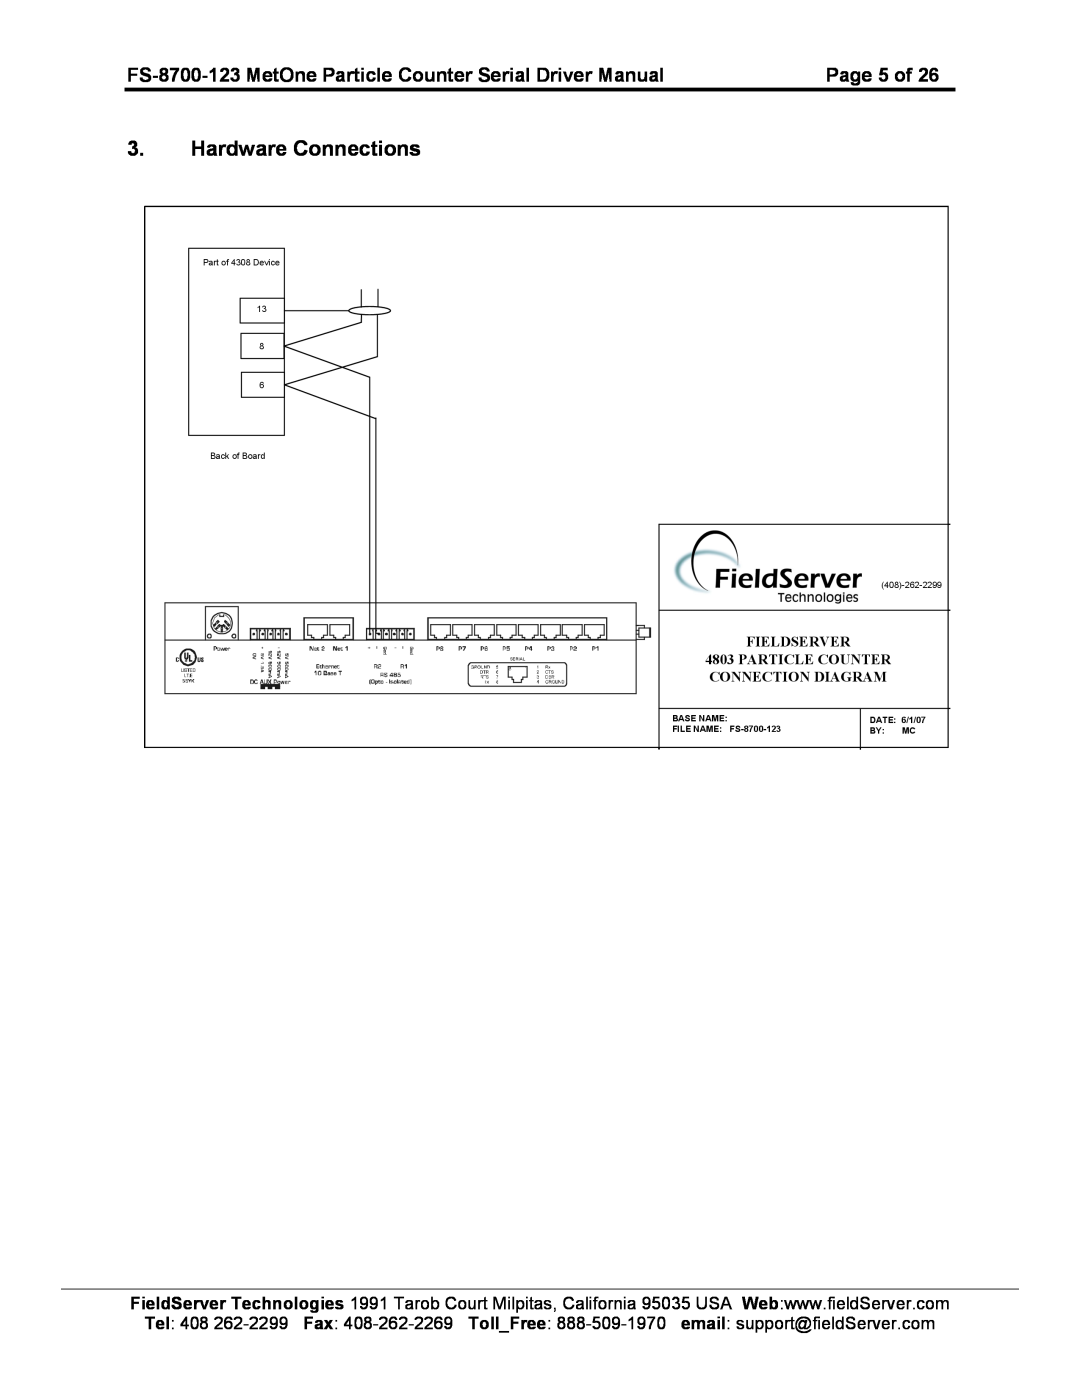 FieldServer FS-8700-123 Hardware Connections, Fieldserver, Particle Counter, Connection Diagram, Part of 4308 Device 